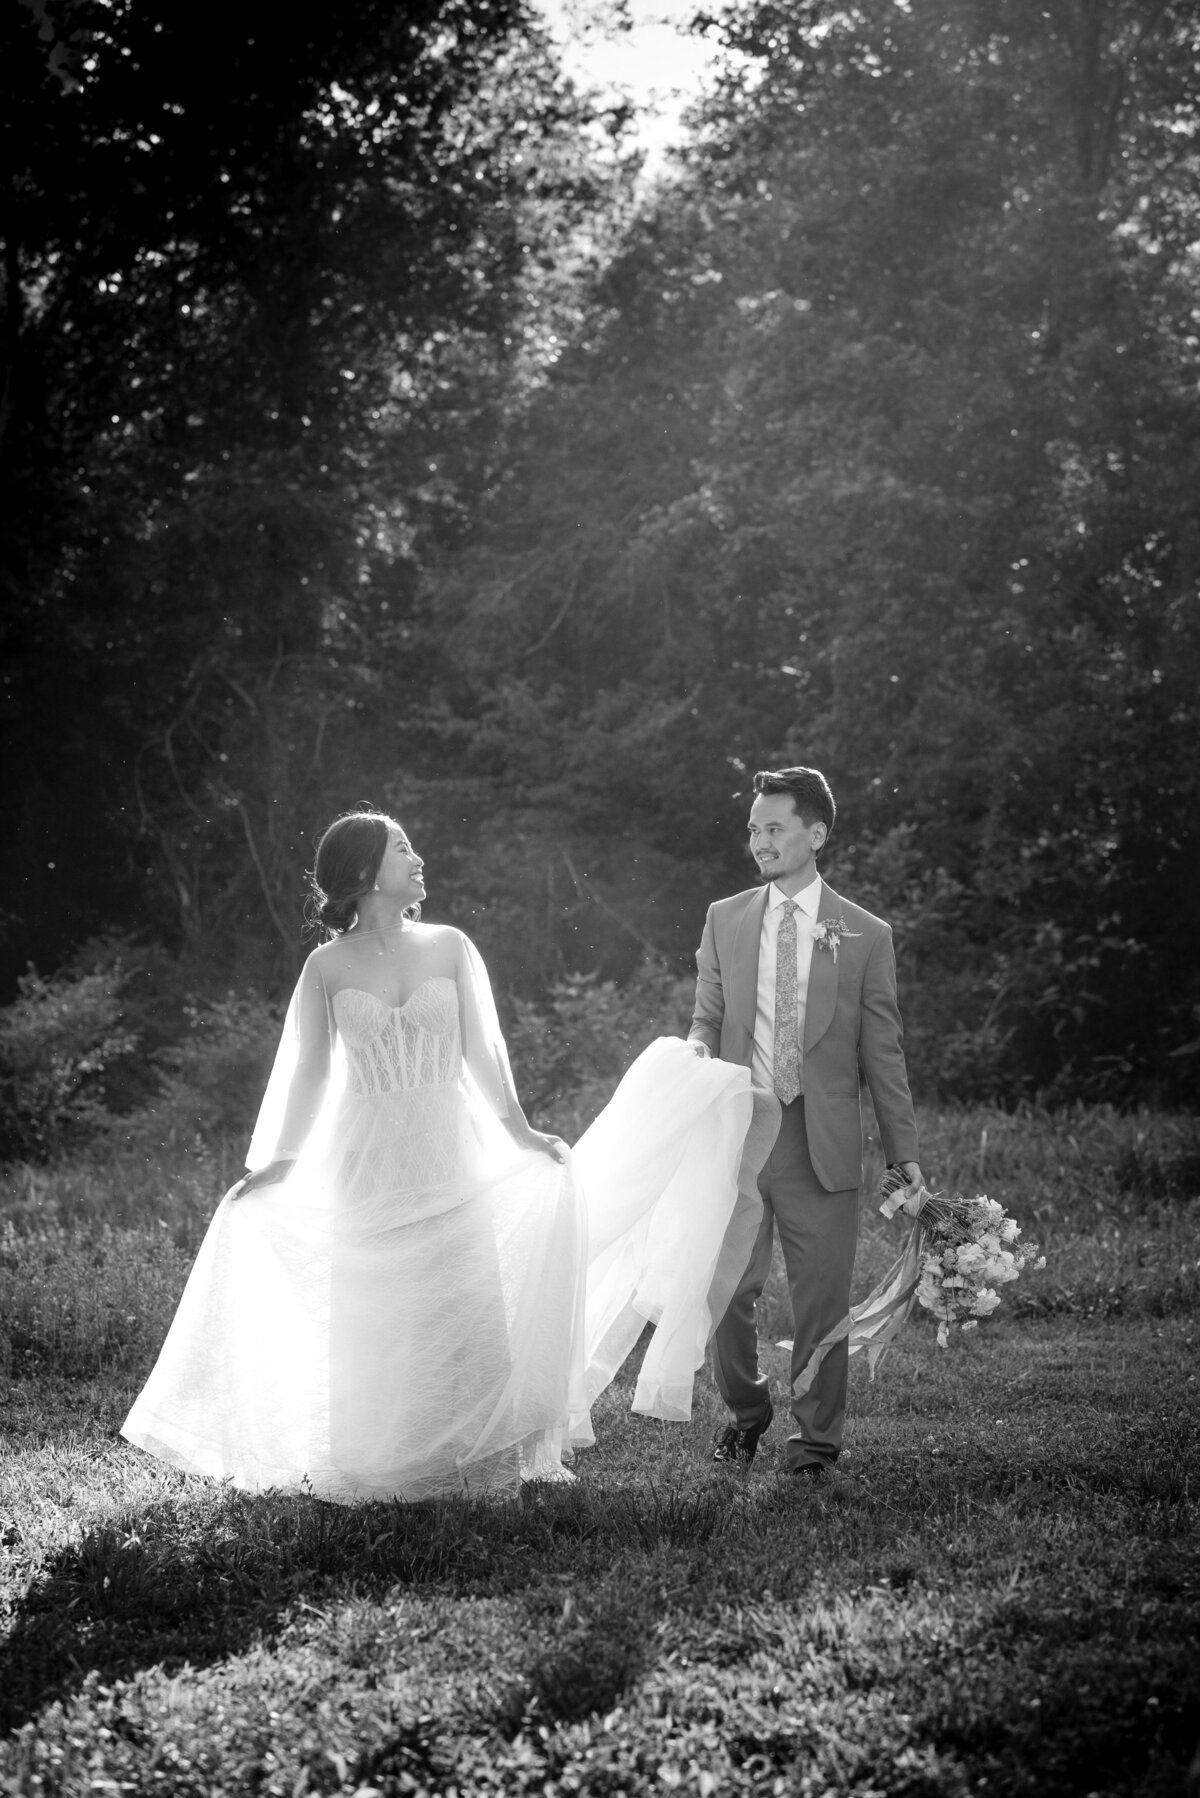 Asian-bride-and-groom-walking-in-rays-of-sunlight-smiling-while-the-groom-carries-the-bride's-train-at-the-Providence-Cotton-Mill-in-Charlotte-NC